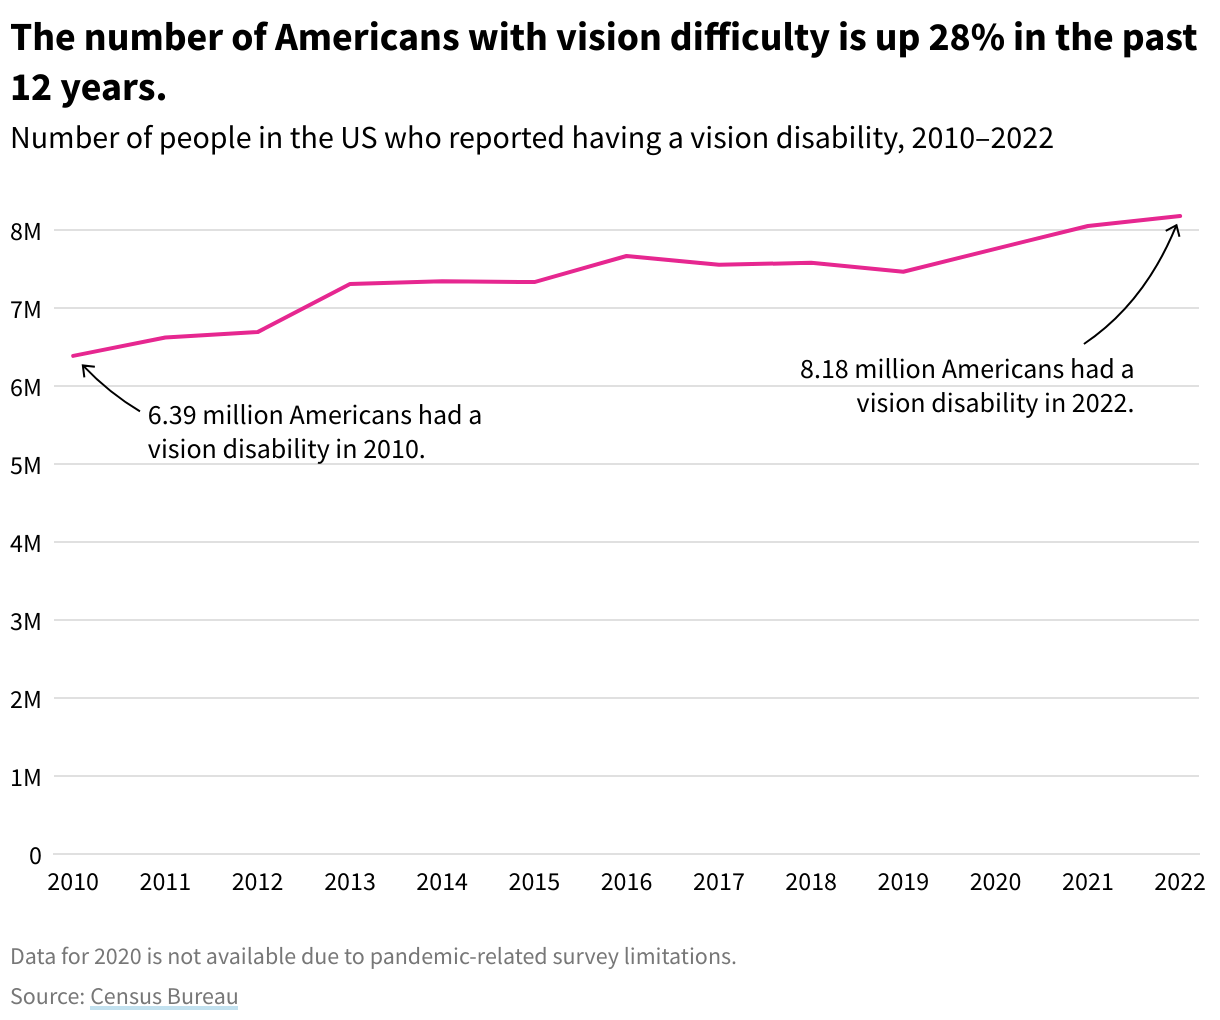 Line chart showing total number of Americans with vision difficulty, 2010–2022. The number of Americans with vision difficulty is up 28% in the past 12 years.